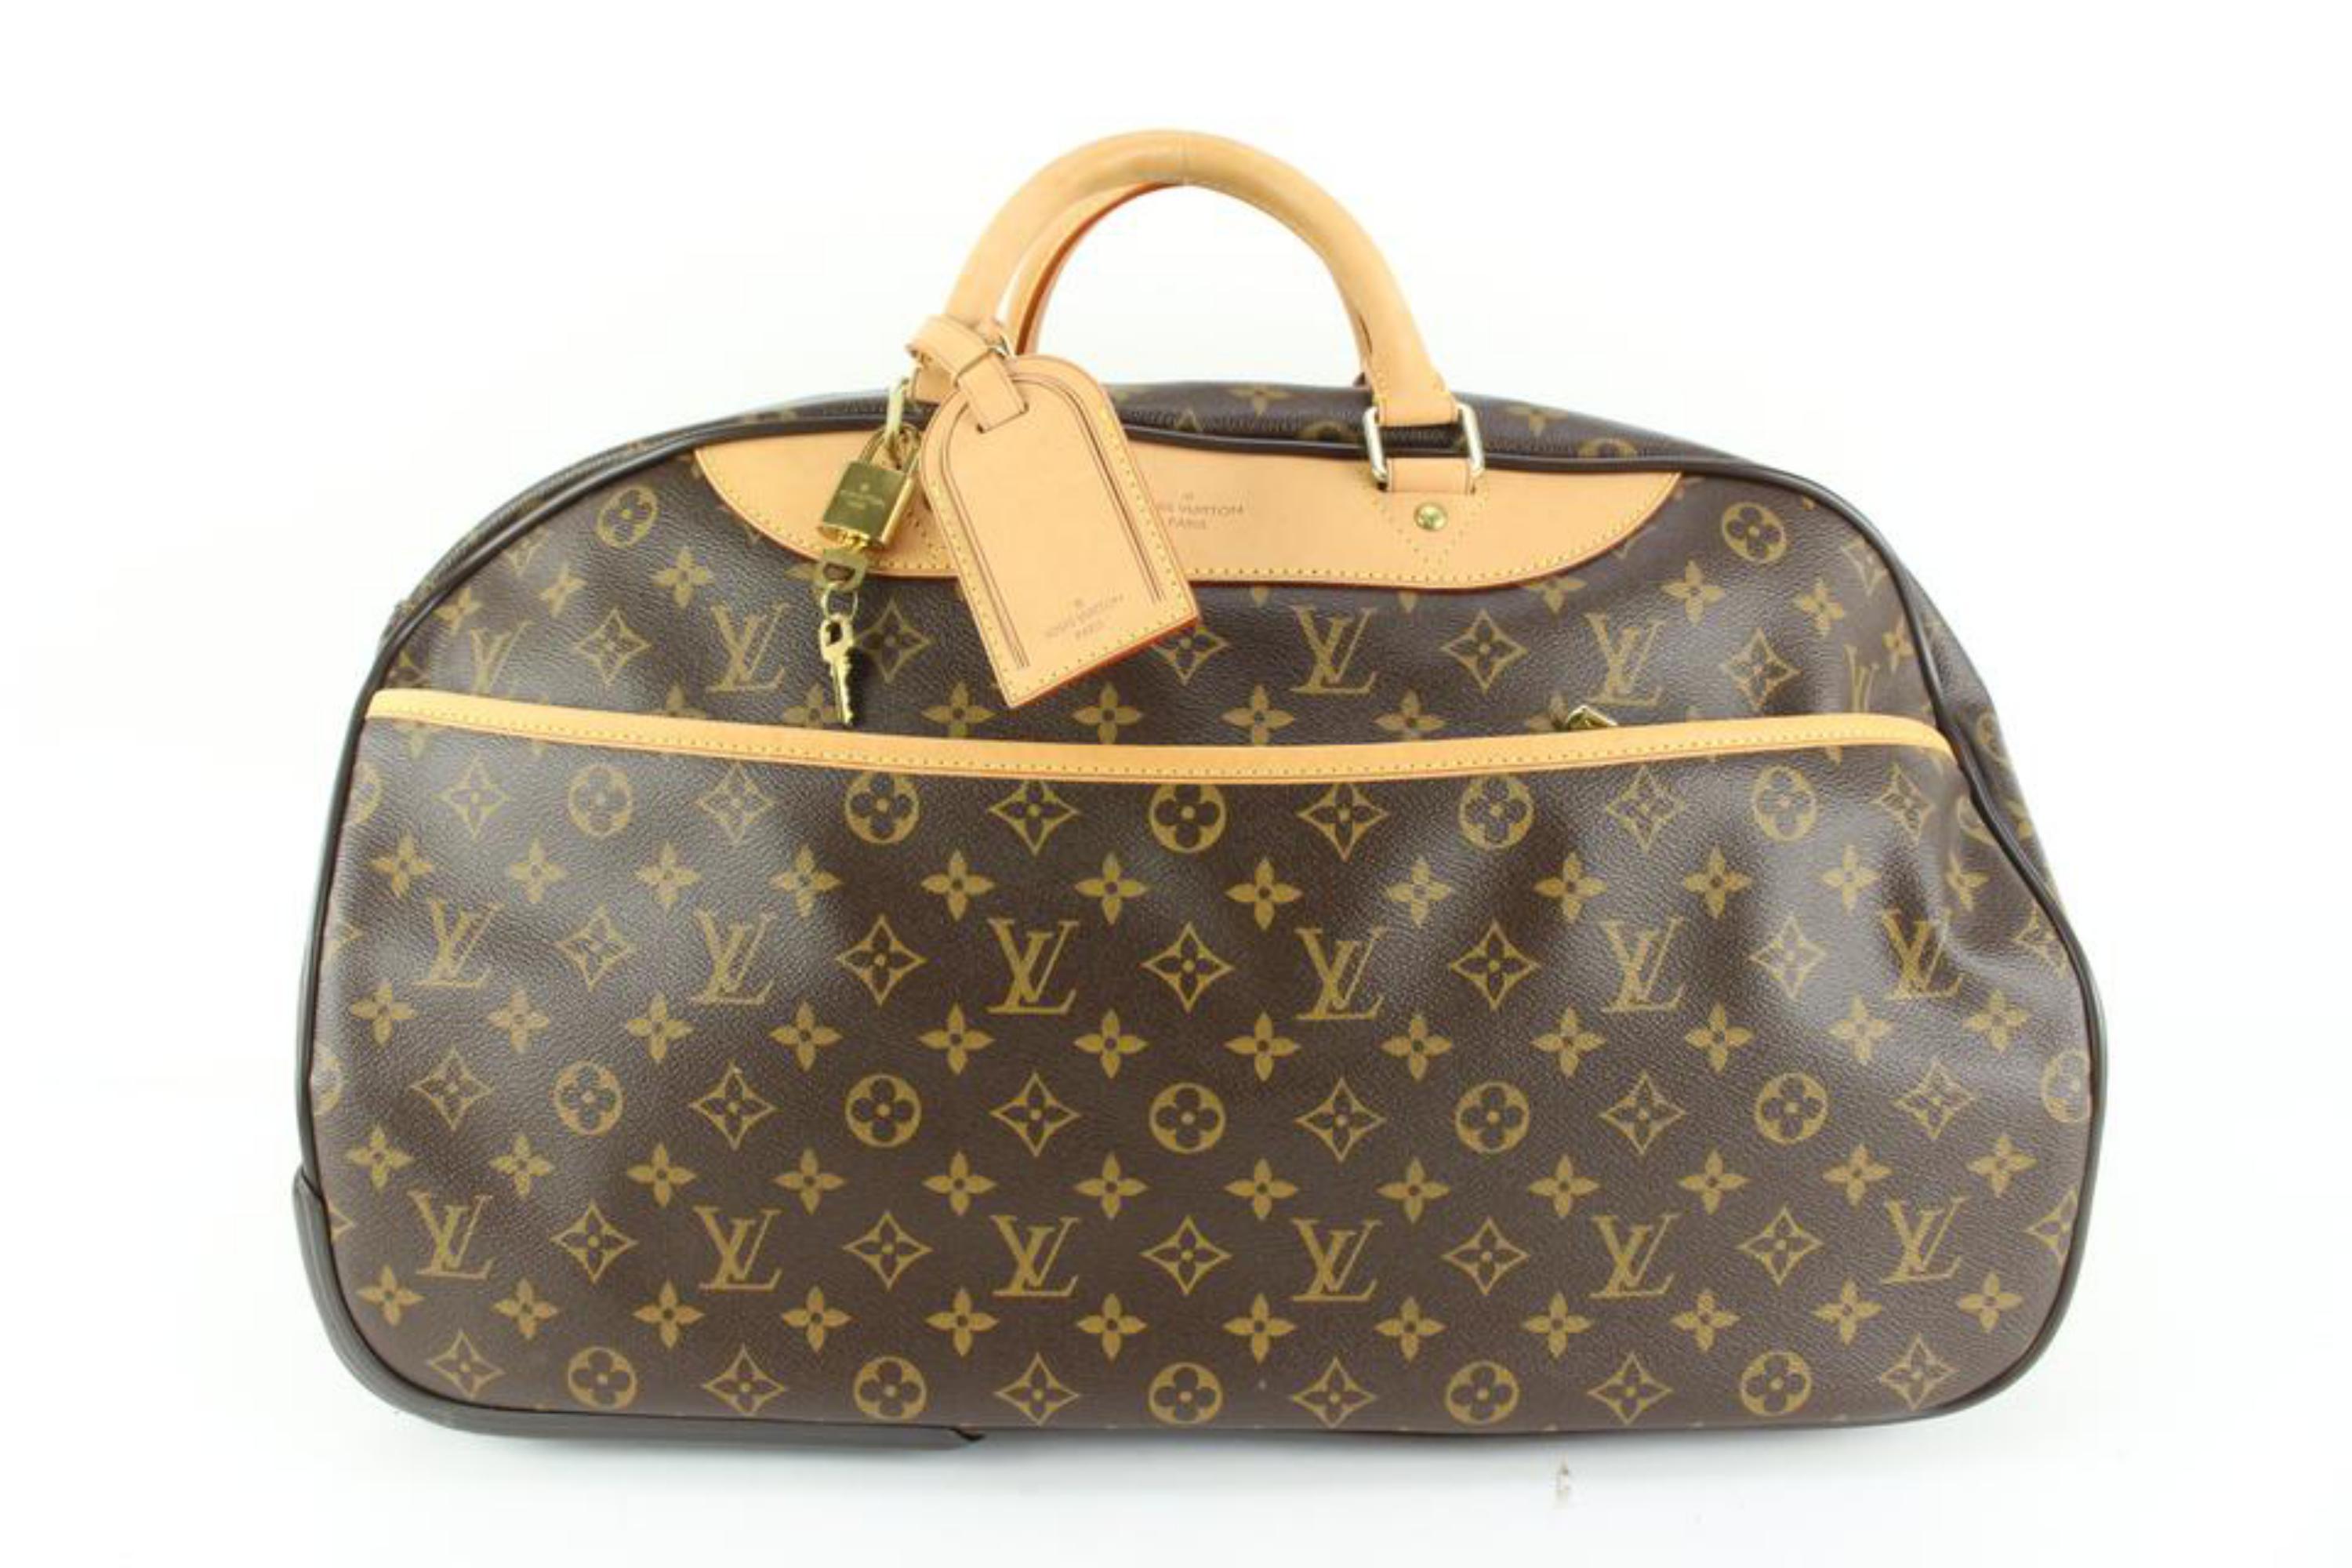 louis vuitton carry on luggage